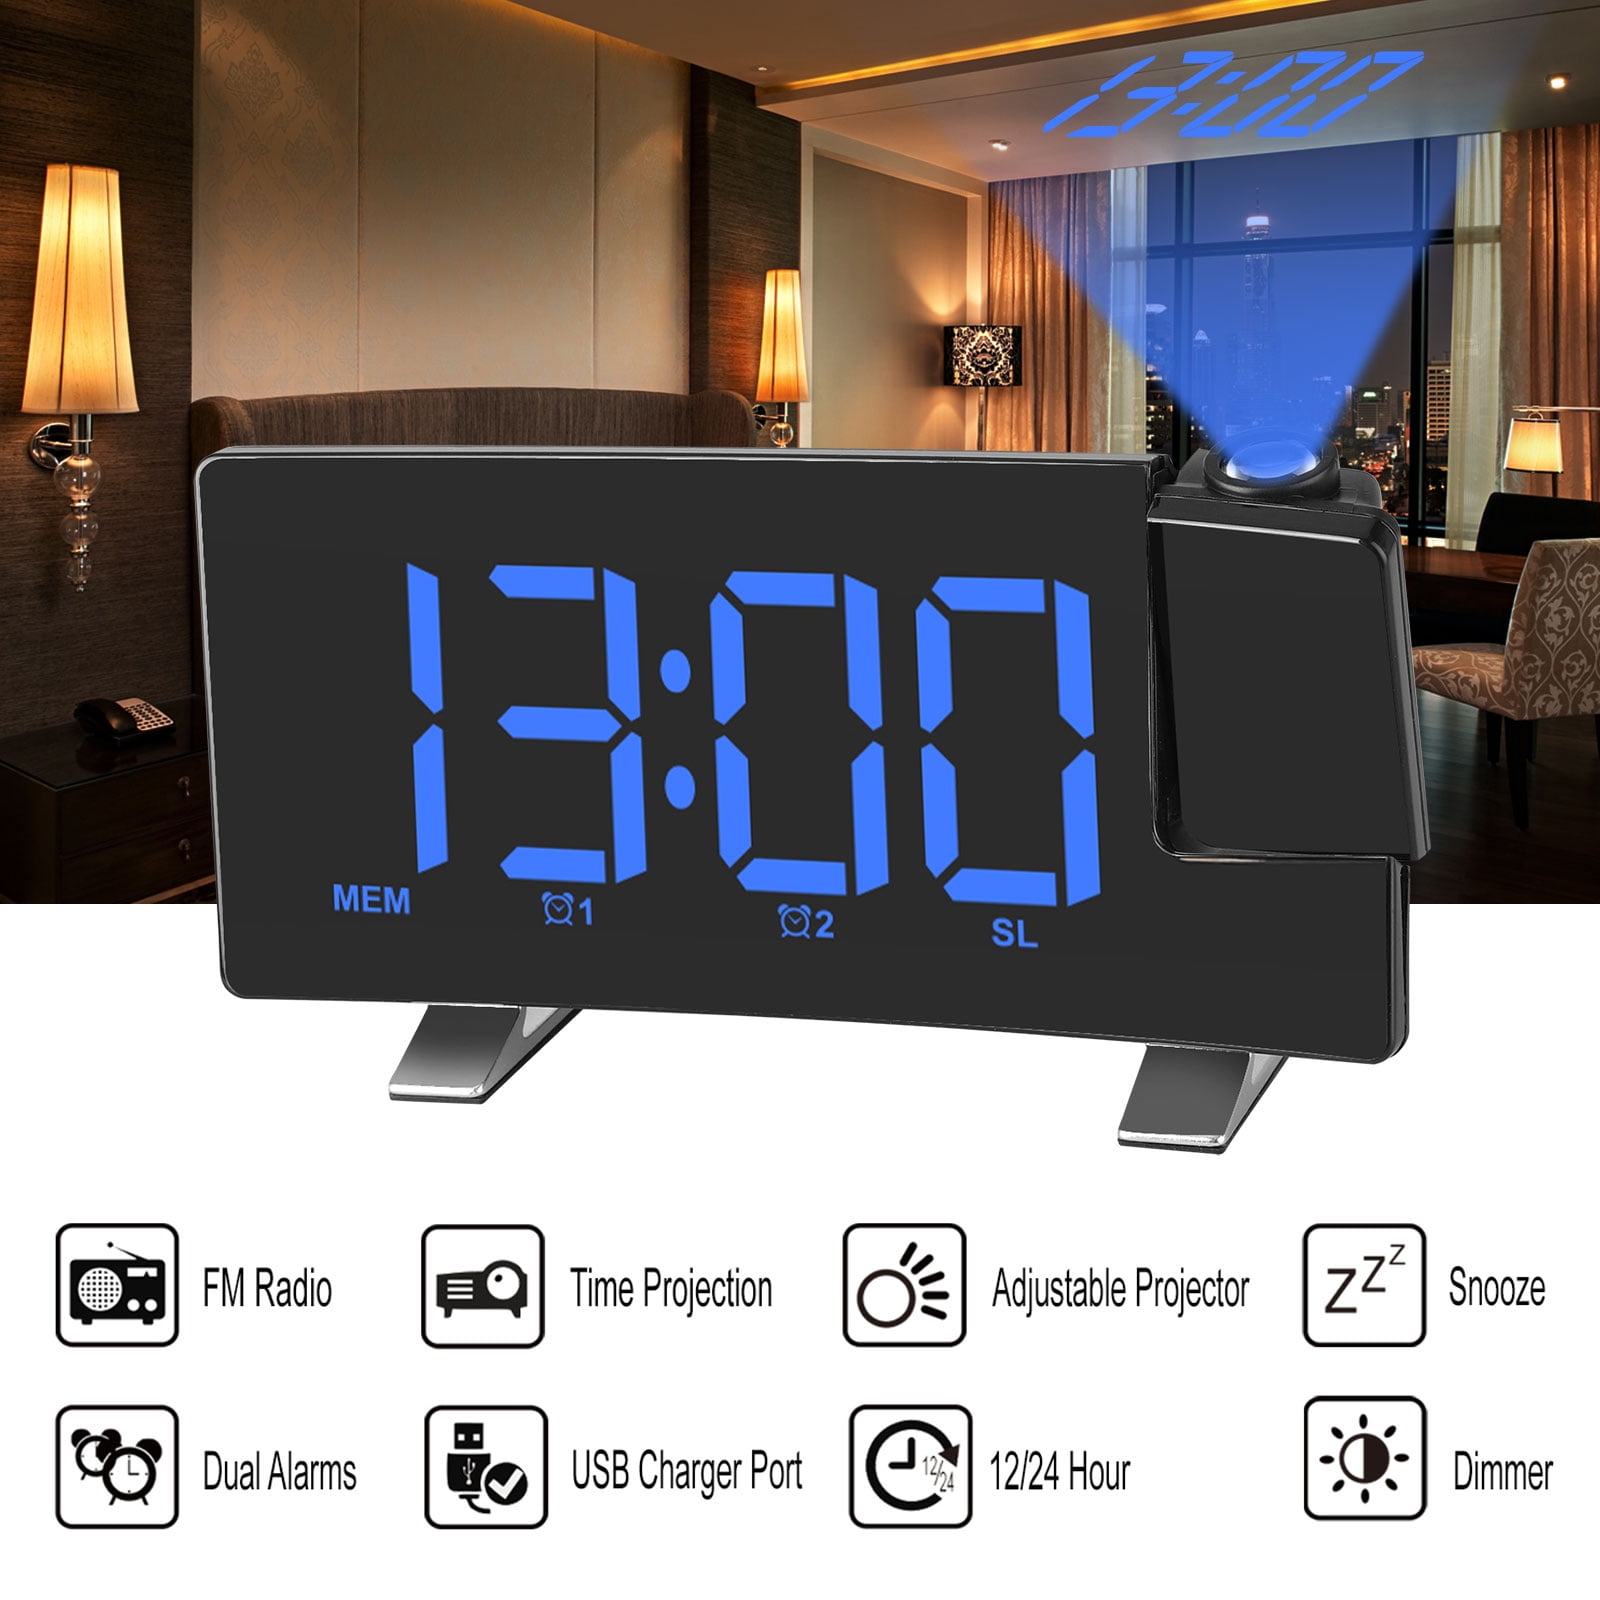 Temperature & Humidity Display Mirror Digital Alarm Clock for Bedroom with USB Charger Dual Alarm Projection Alarm Clock with Projection on Ceiling 0-100% Dimmer Snooze 12/24H 